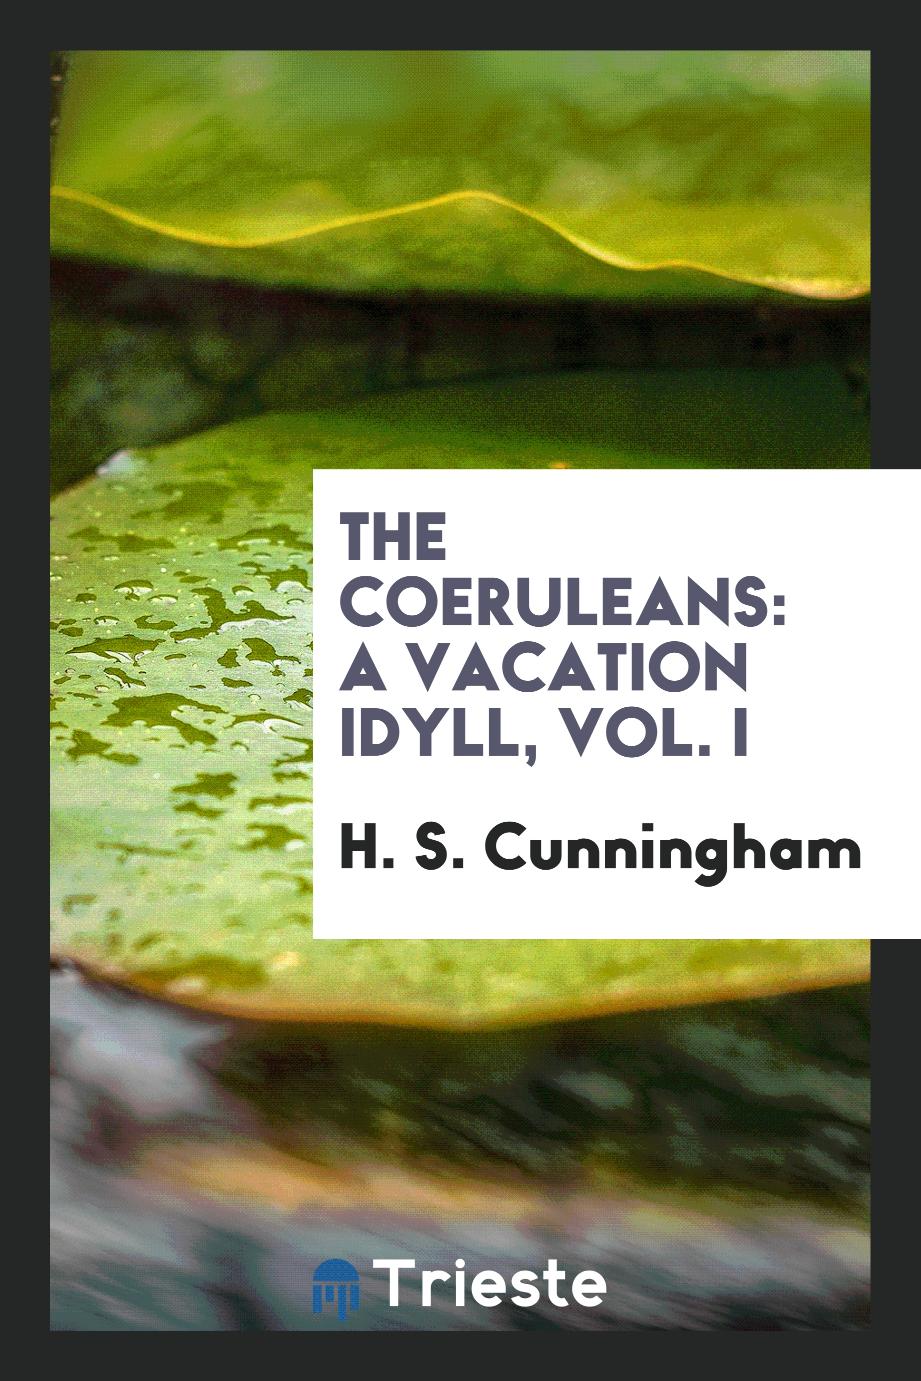 The Coeruleans: a vacation idyll, Vol. I